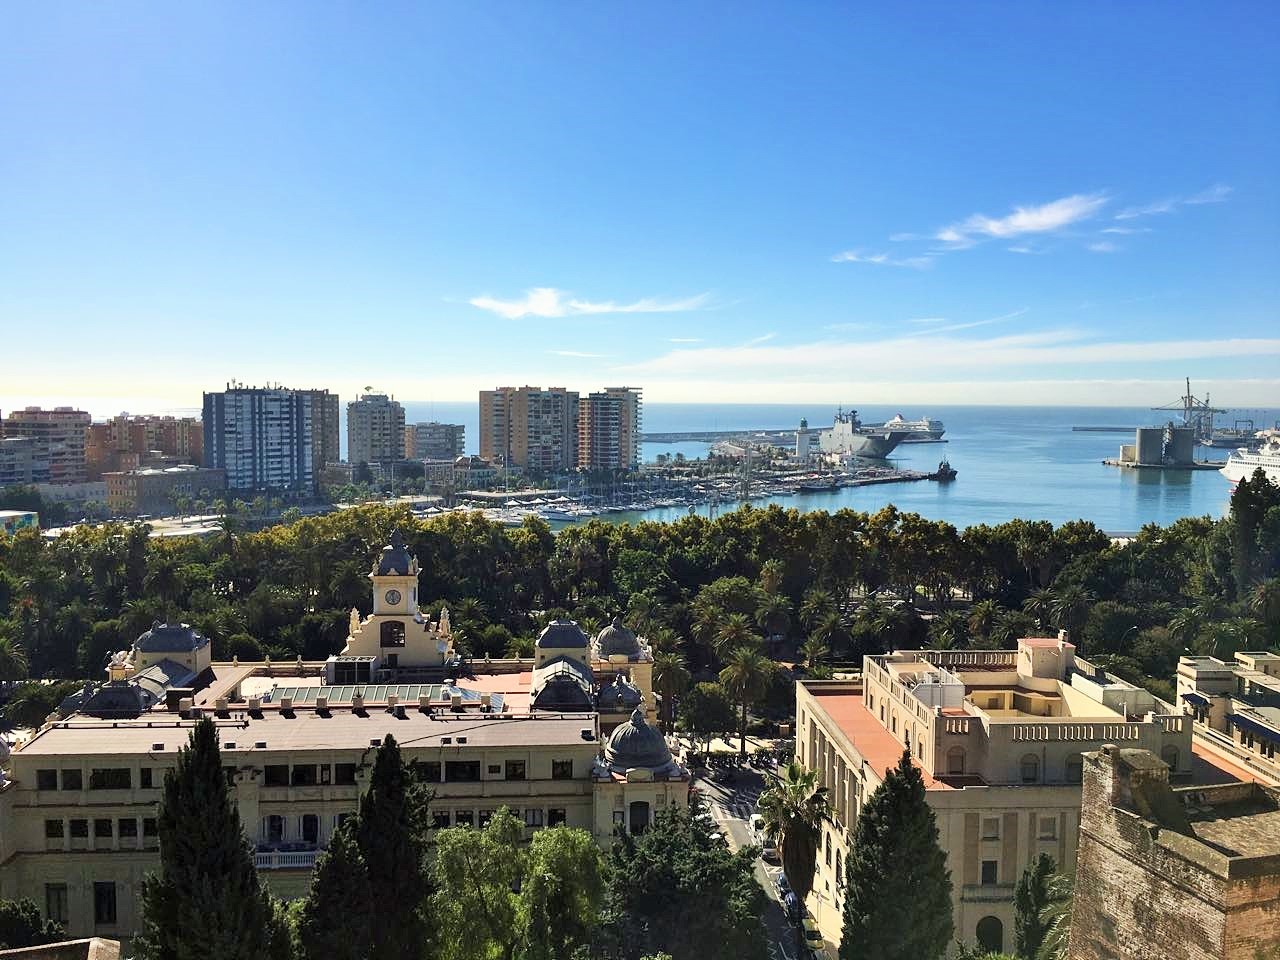 Malaga - one of the most touristic cities in Andalusia | Erasmus blog  Malaga, Spain